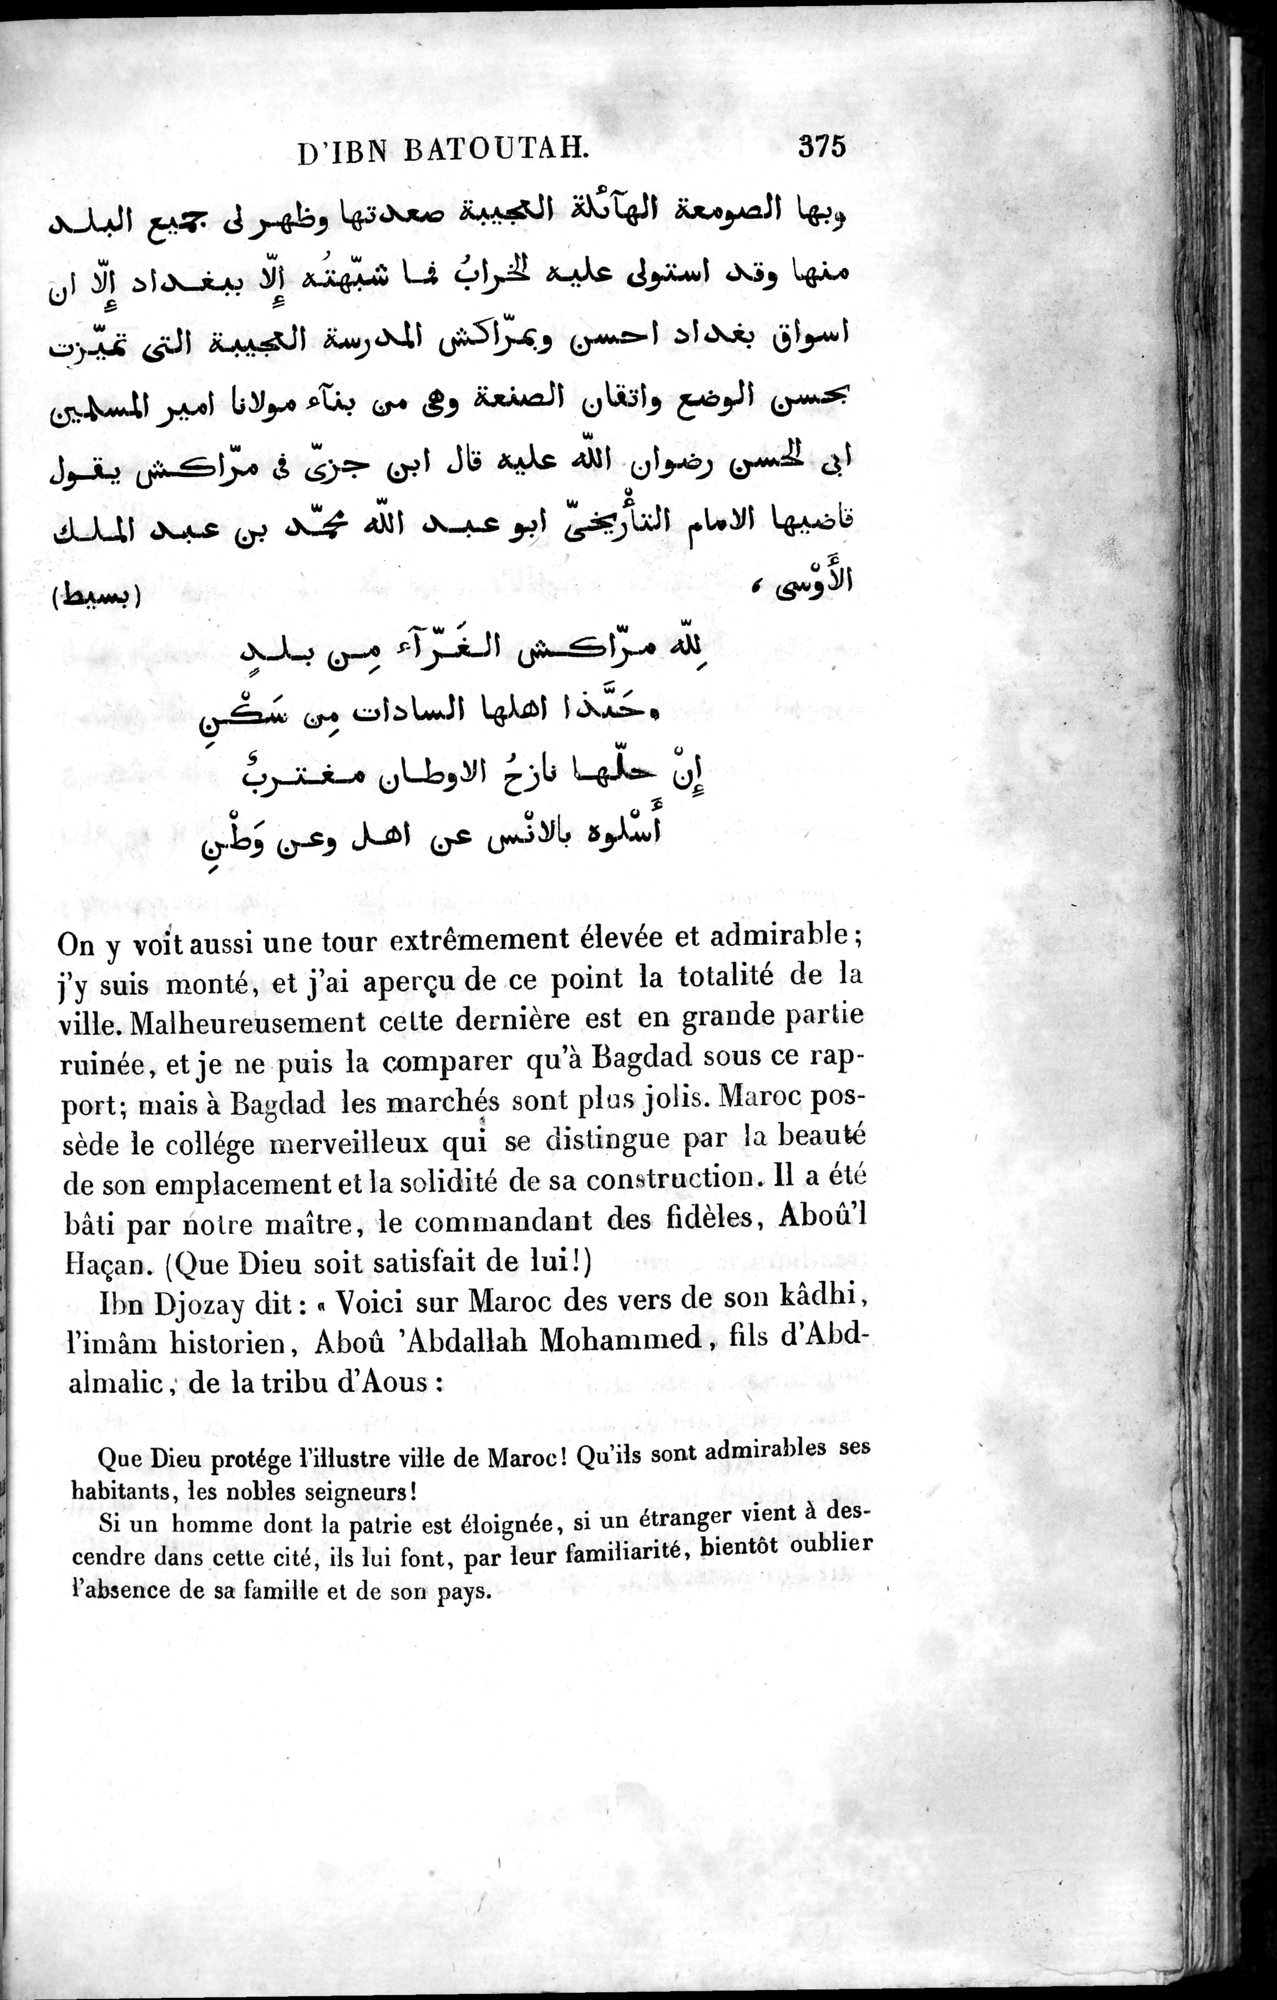 Voyages d'Ibn Batoutah : vol.4 / Page 387 (Grayscale High Resolution Image)